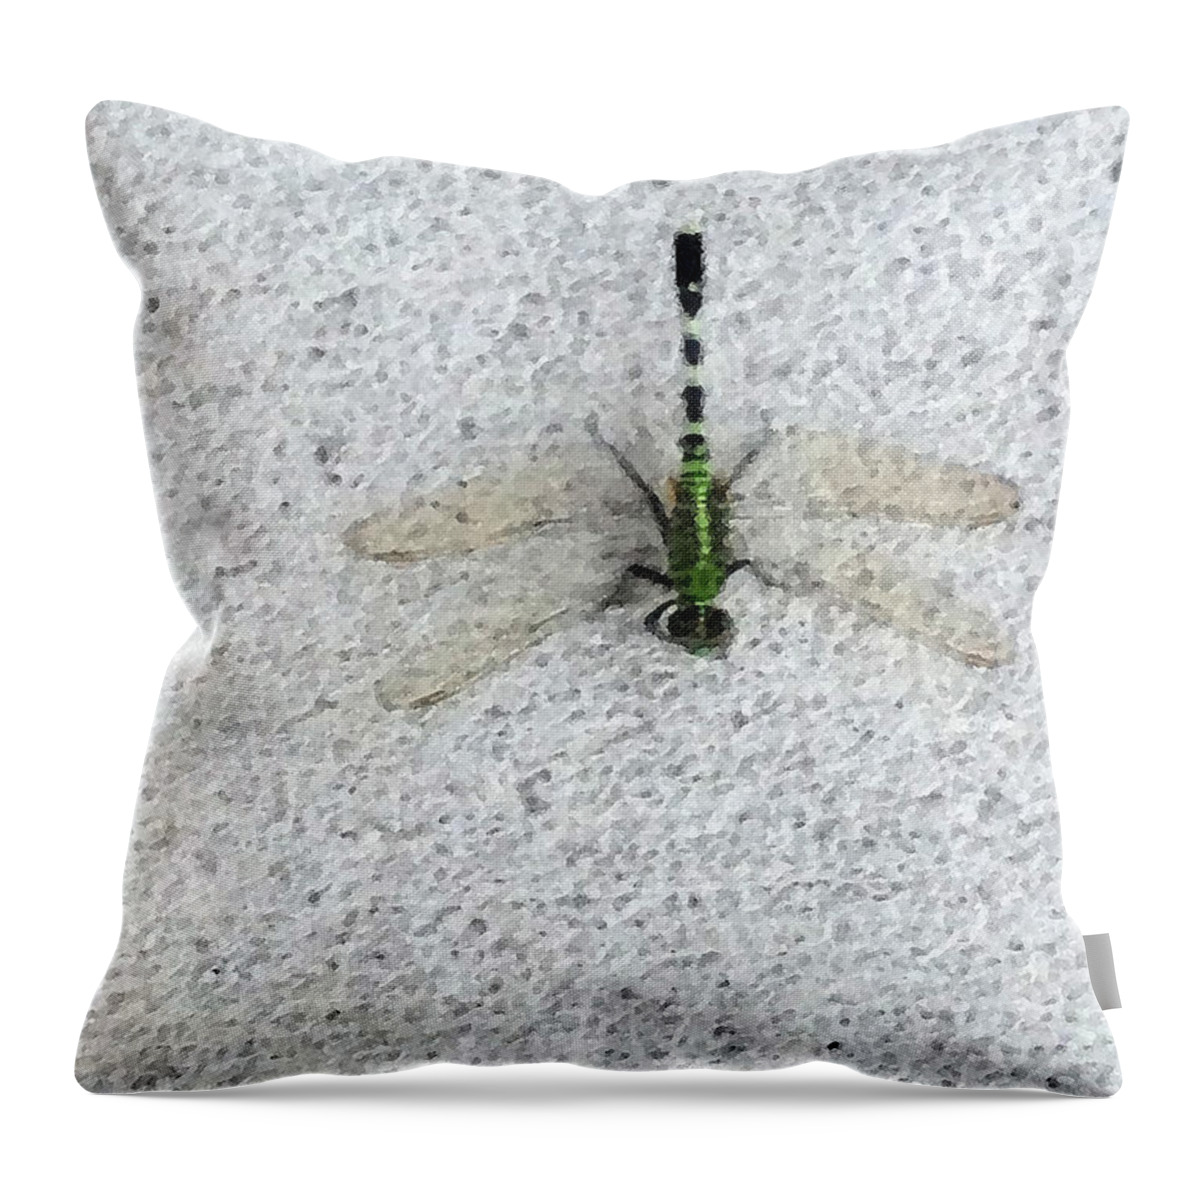 Dragonfly Throw Pillow featuring the painting Dragonfly by George Pedro